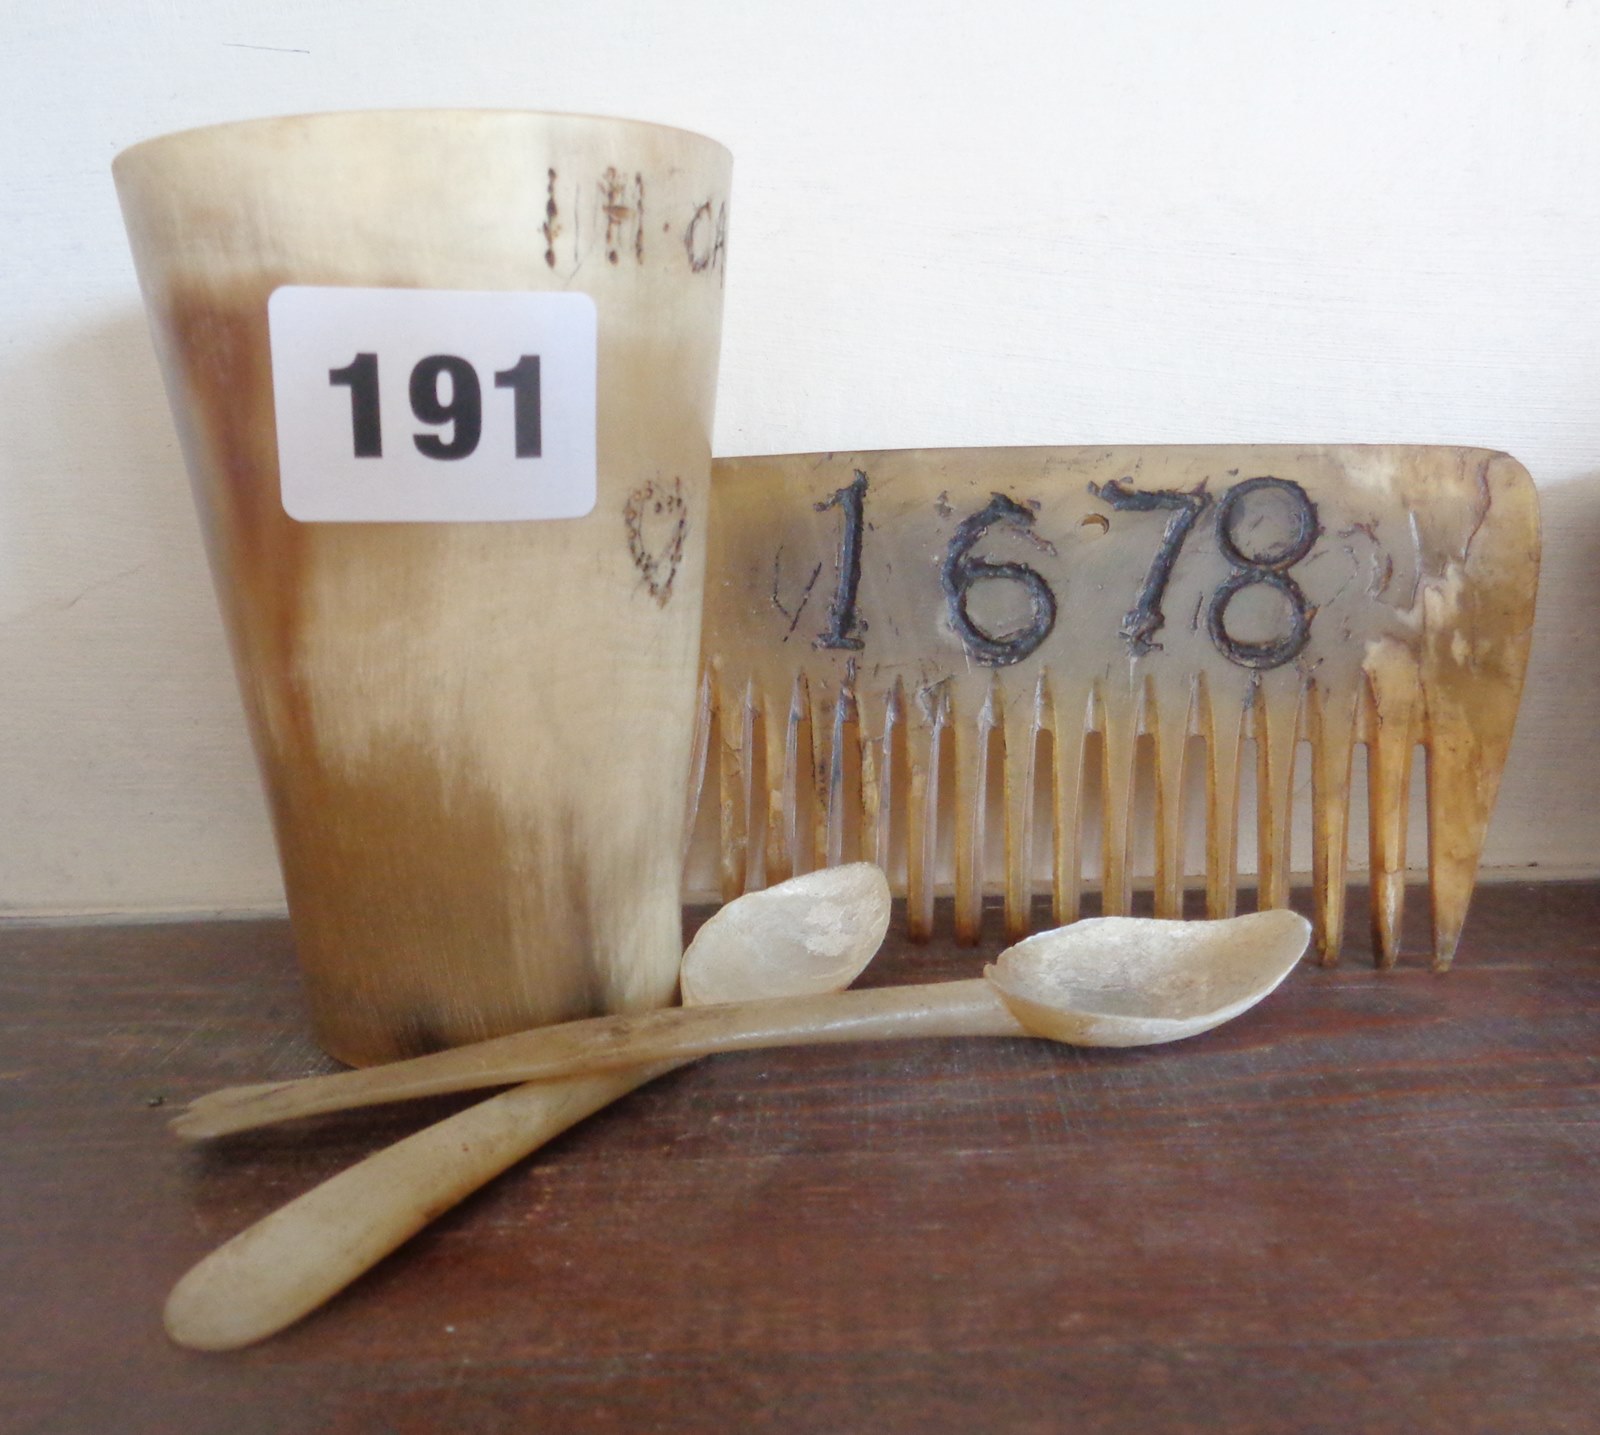 19th c. horn beaker, two spoons and a horn comb with 1678 date